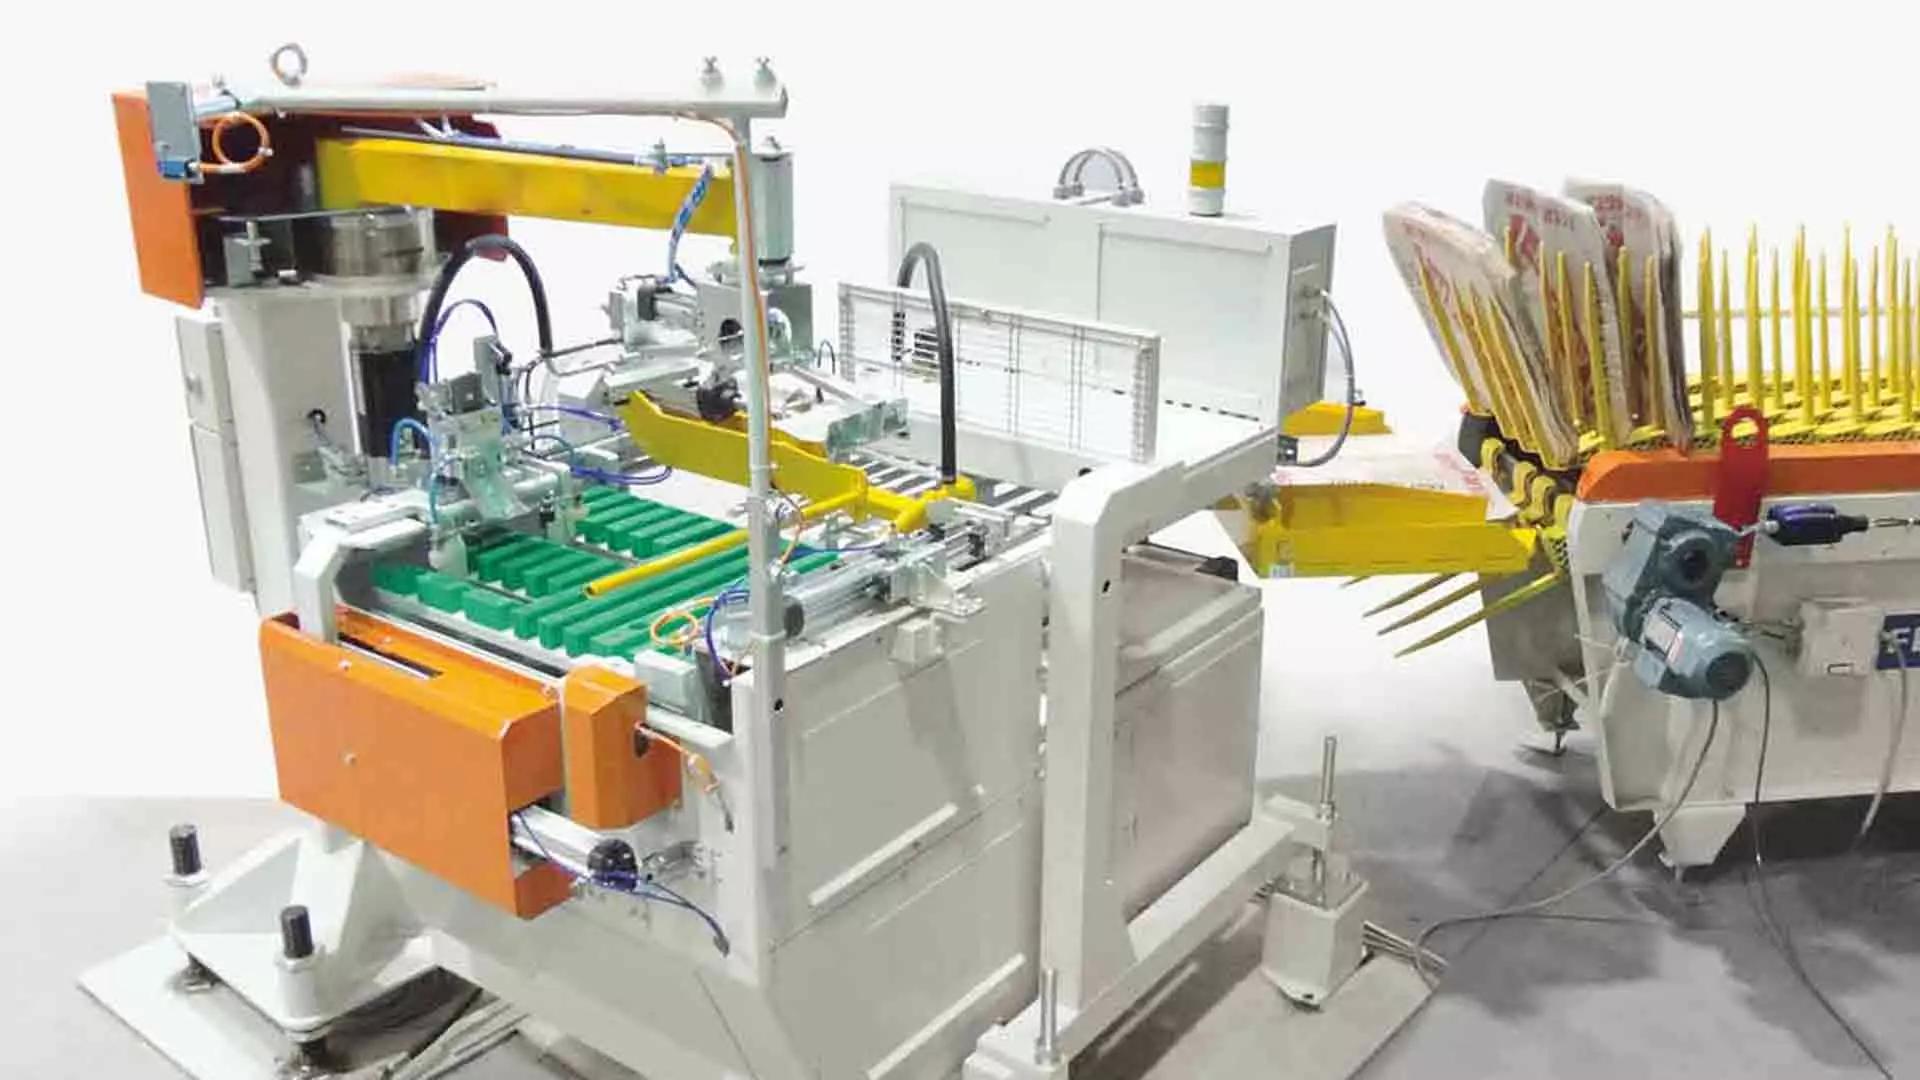 Depalletizer, Bag Applicator And Packer For A Complete High-Performing  Packing Line •